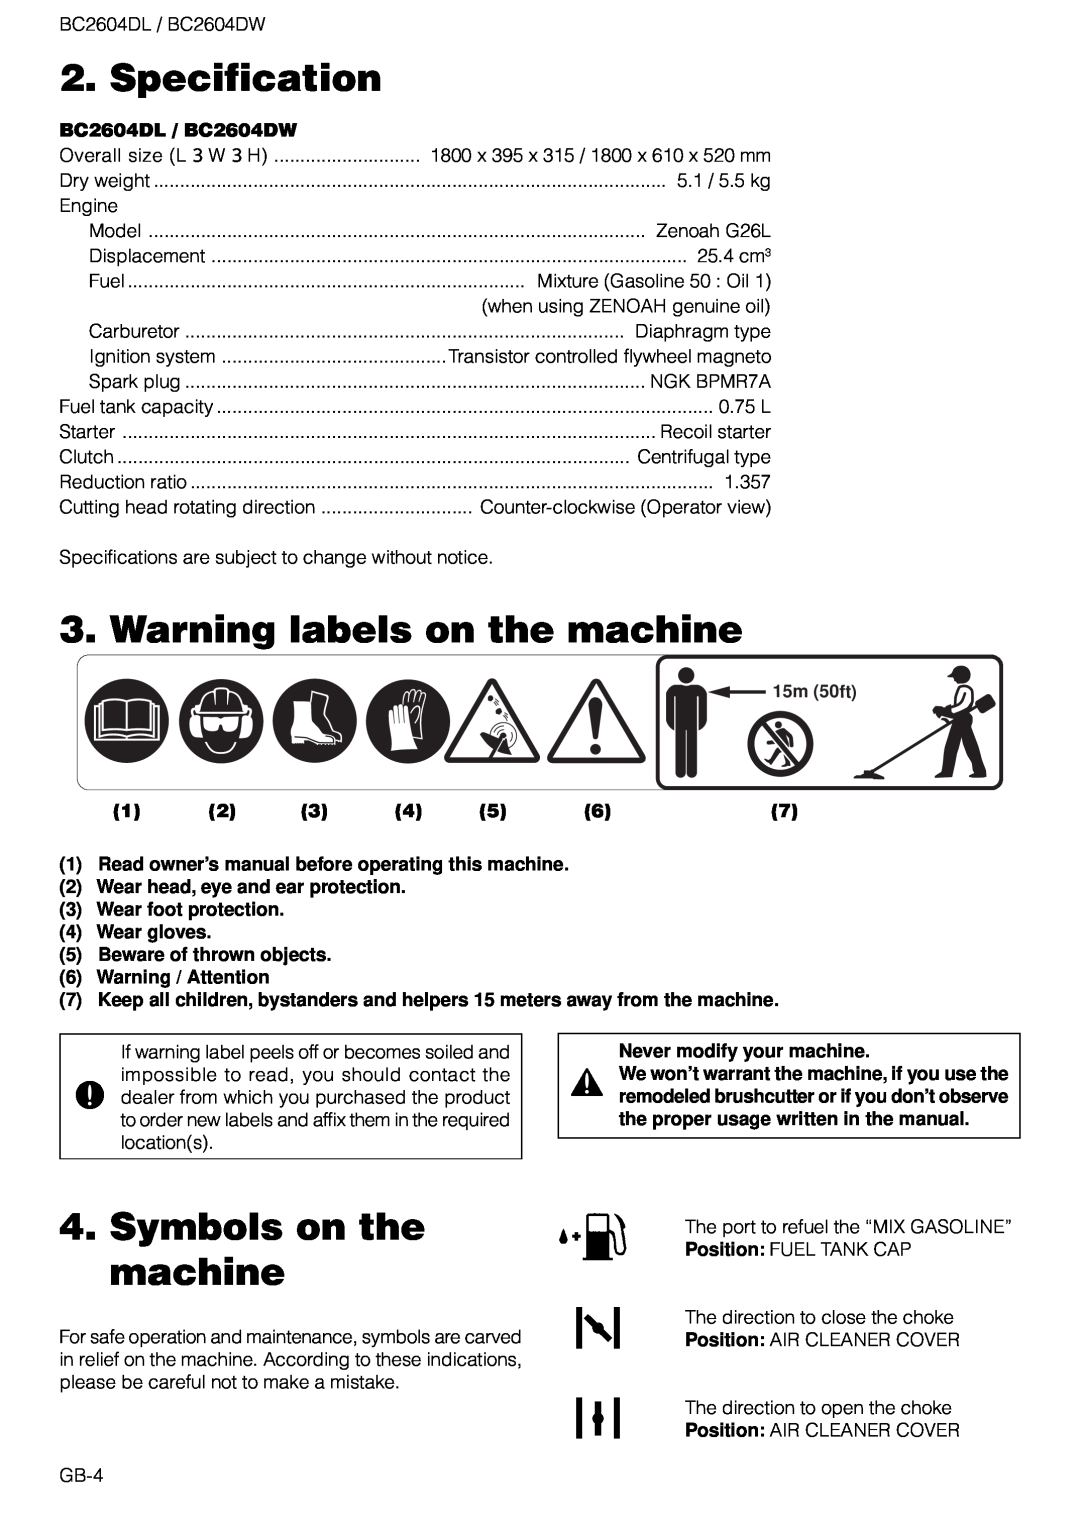 Zenoah owner manual Specification, Warning labels on the machine, Symbols on the machine, BC2604DL / BC2604DW 